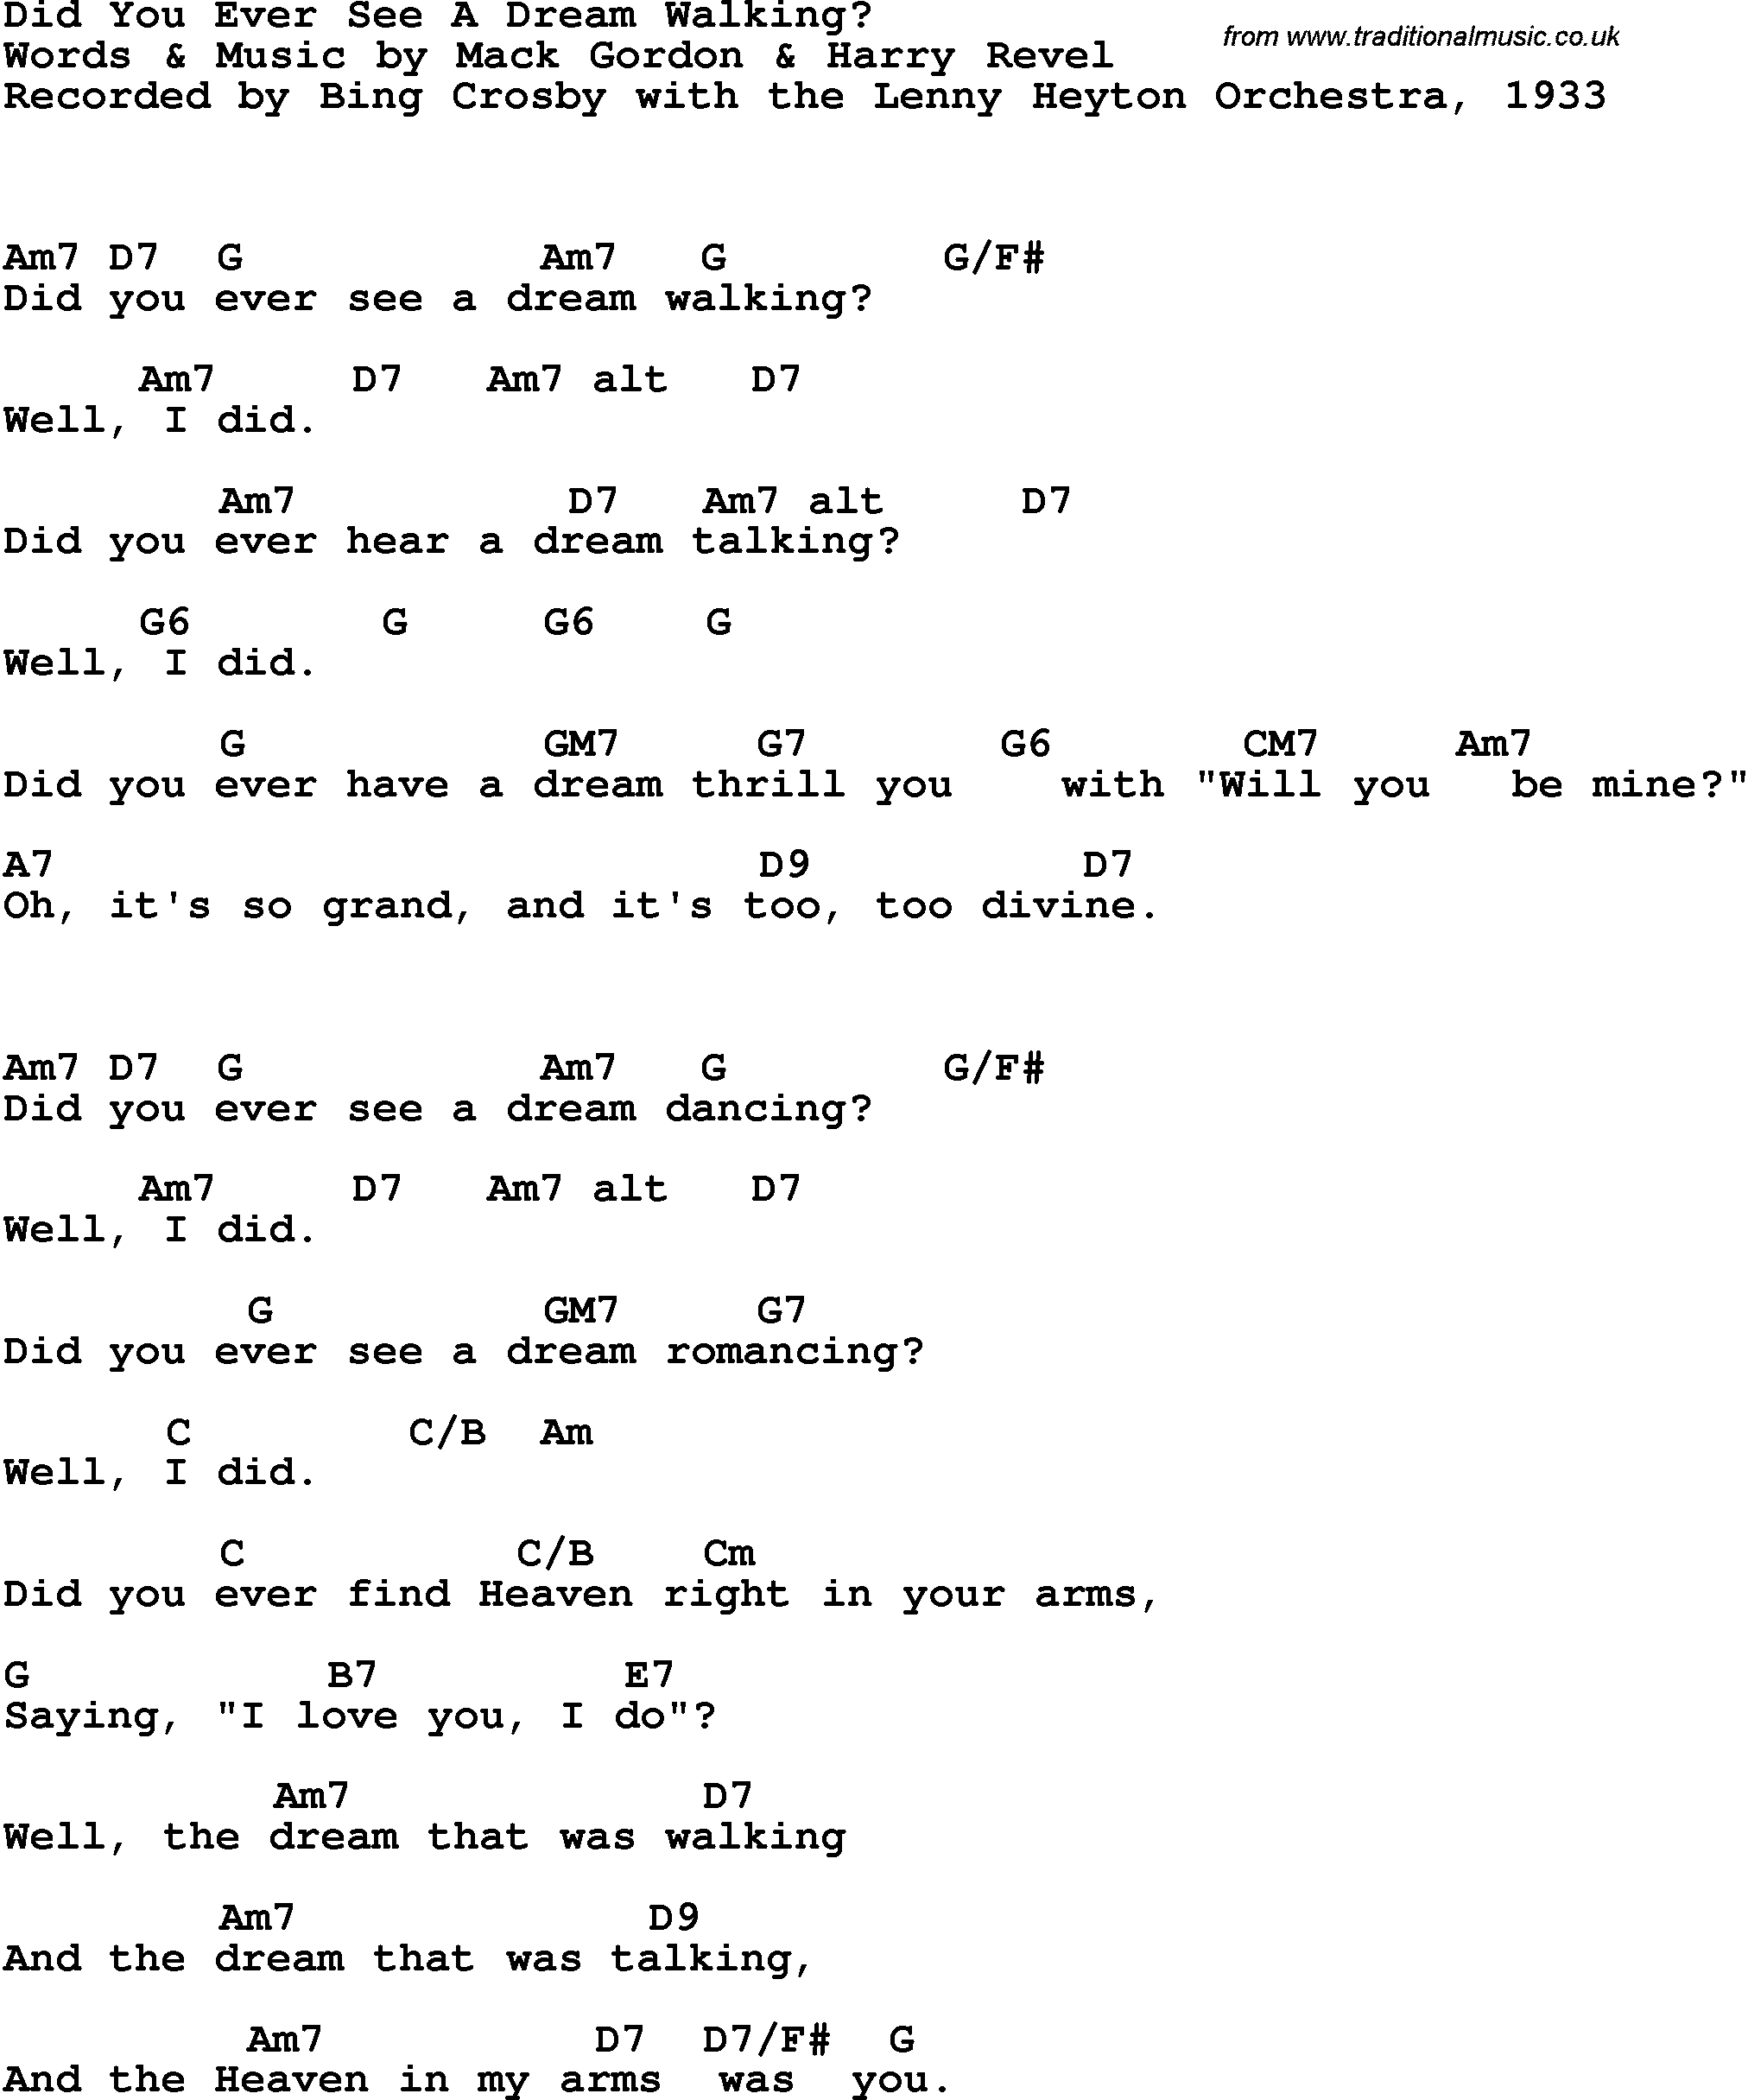 Song Lyrics with guitar chords for Did You Ever See A Dream Walking - Bing Crosby, 1933